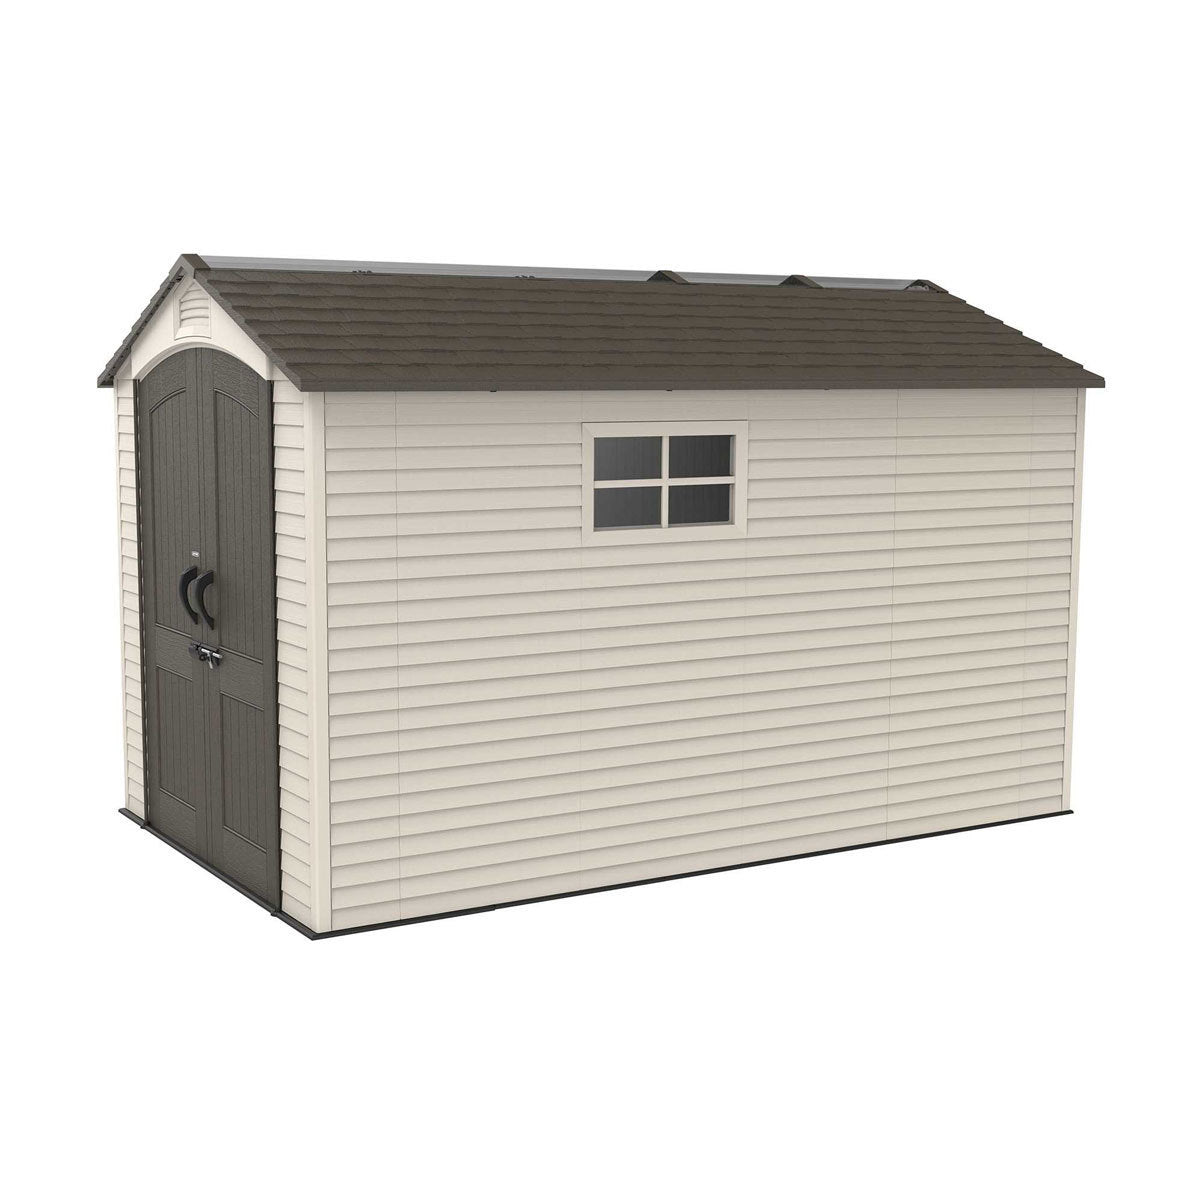 Lifetime 7ft x 12ft (2.1 x 3.6m) Outdoor Storage Shed - Model 60282